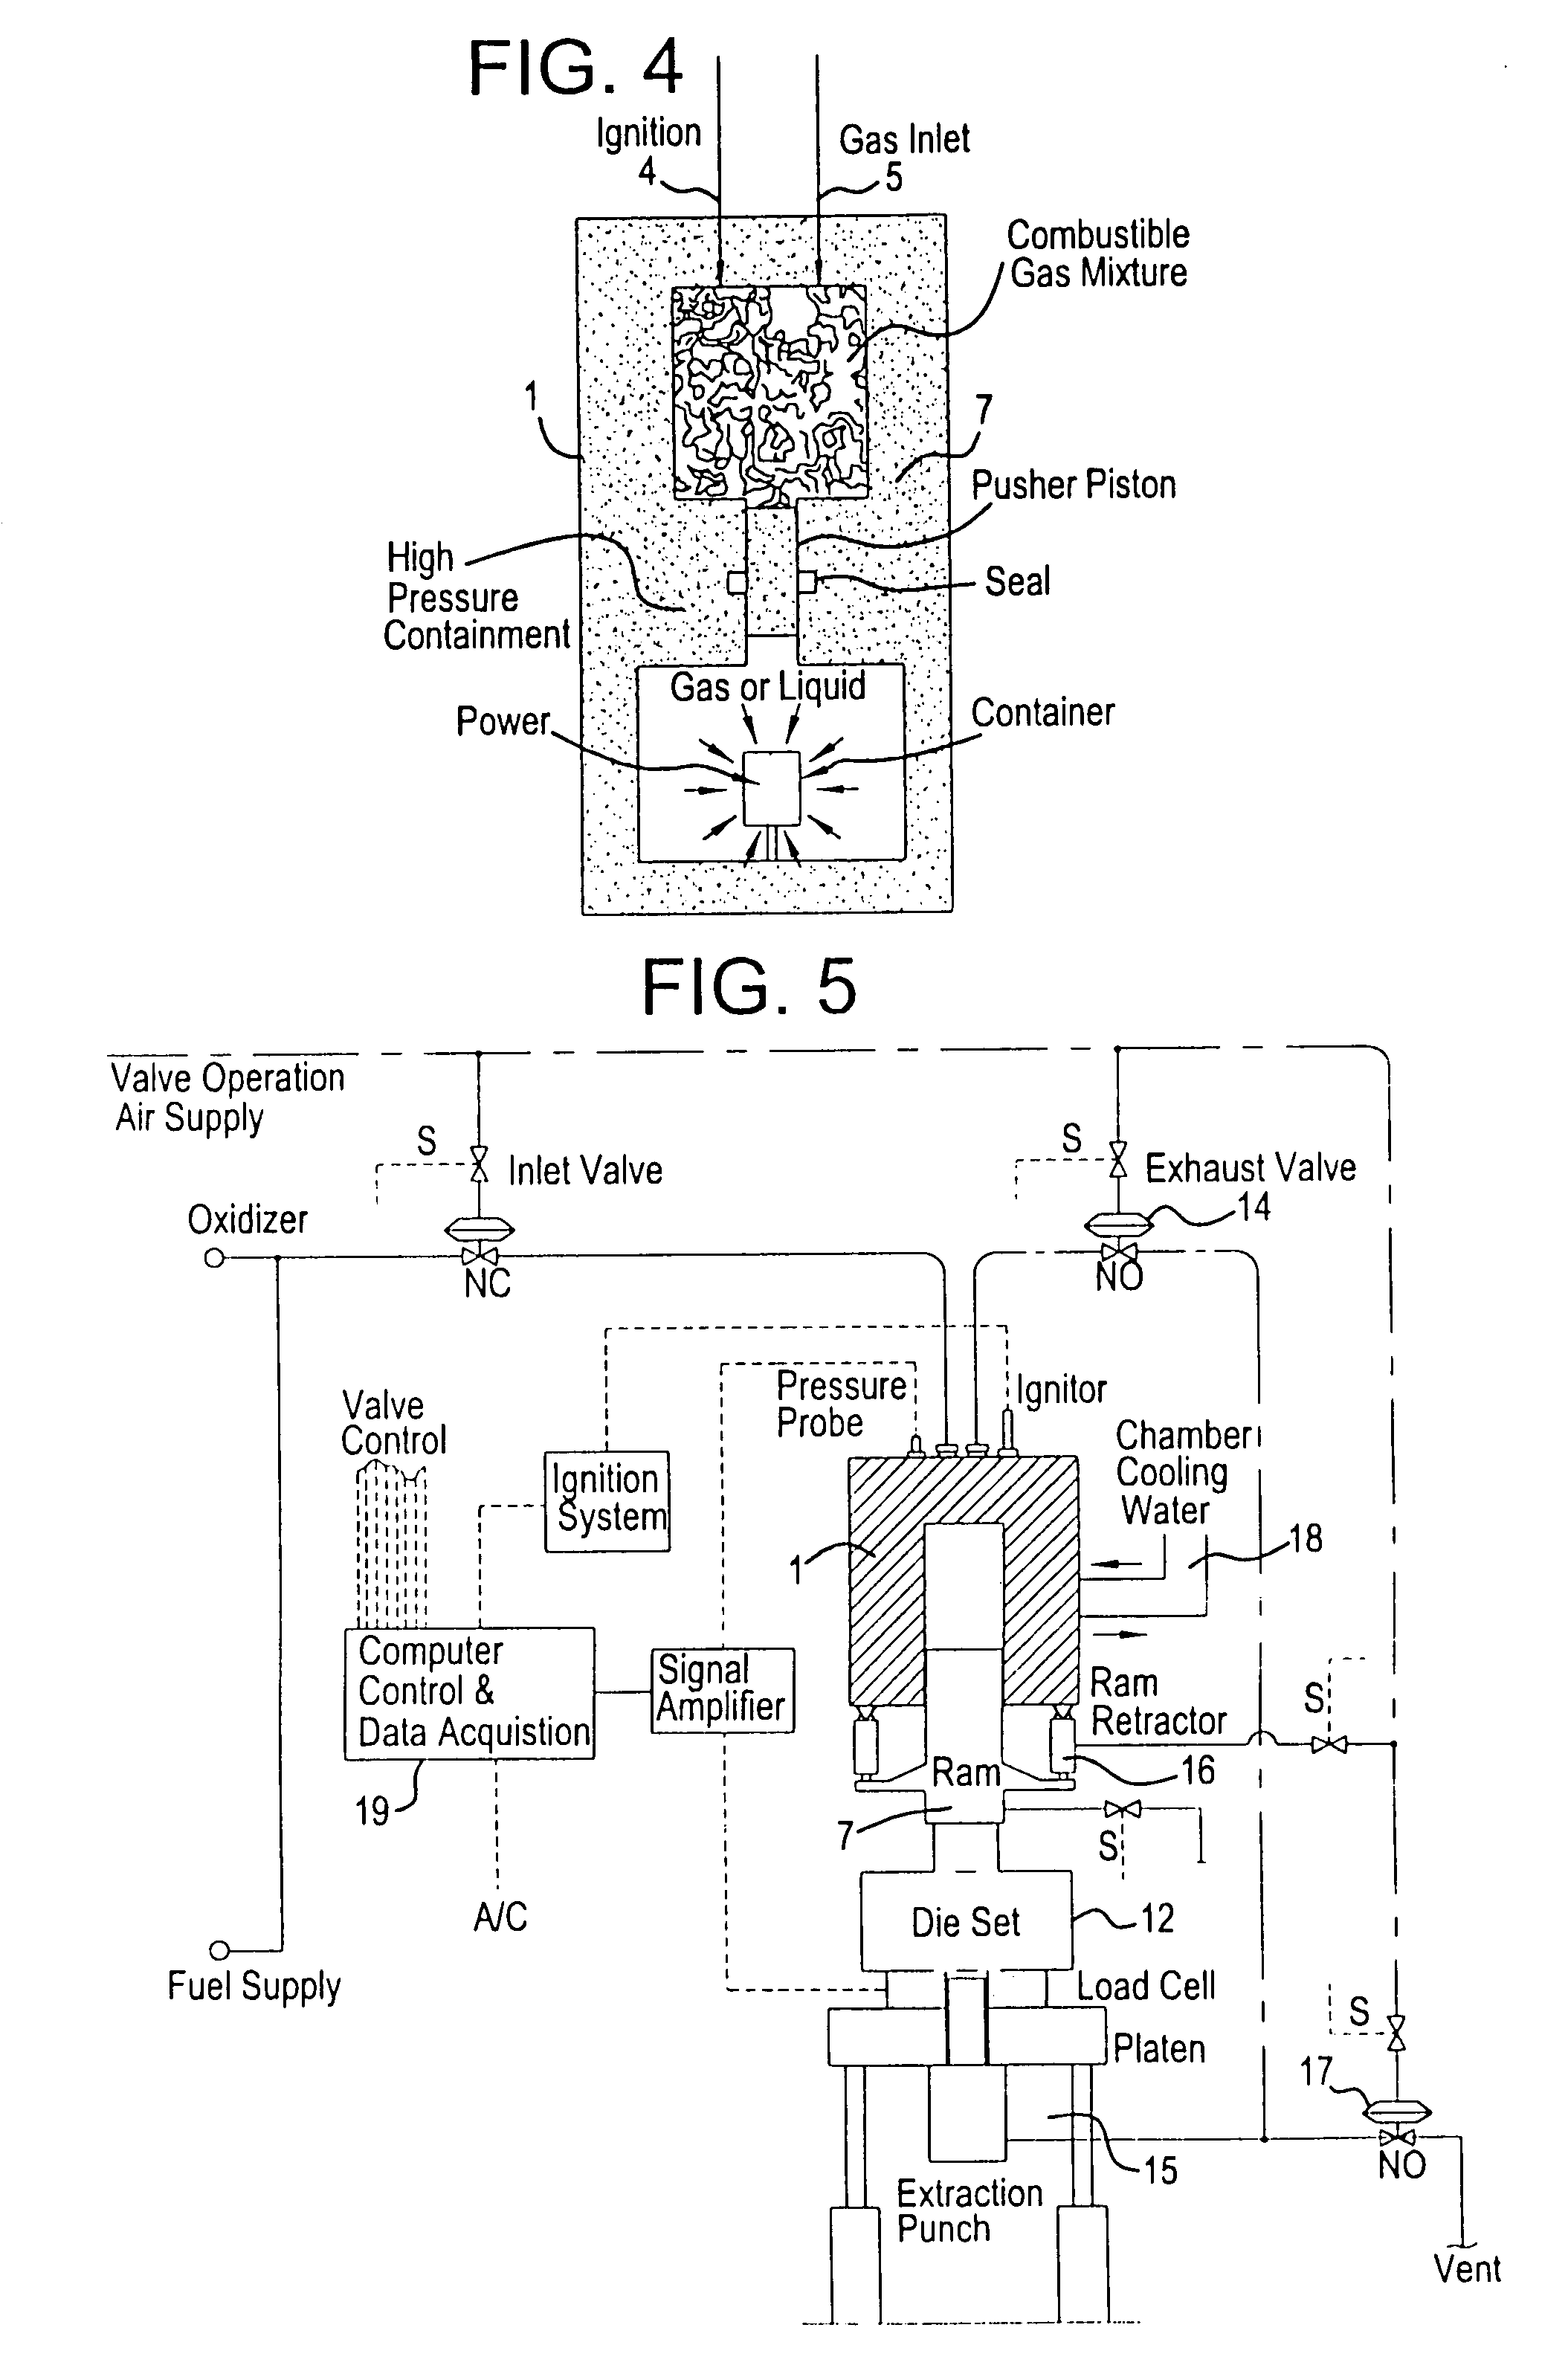 Dynamic consolidation of powders using a pulsed energy source